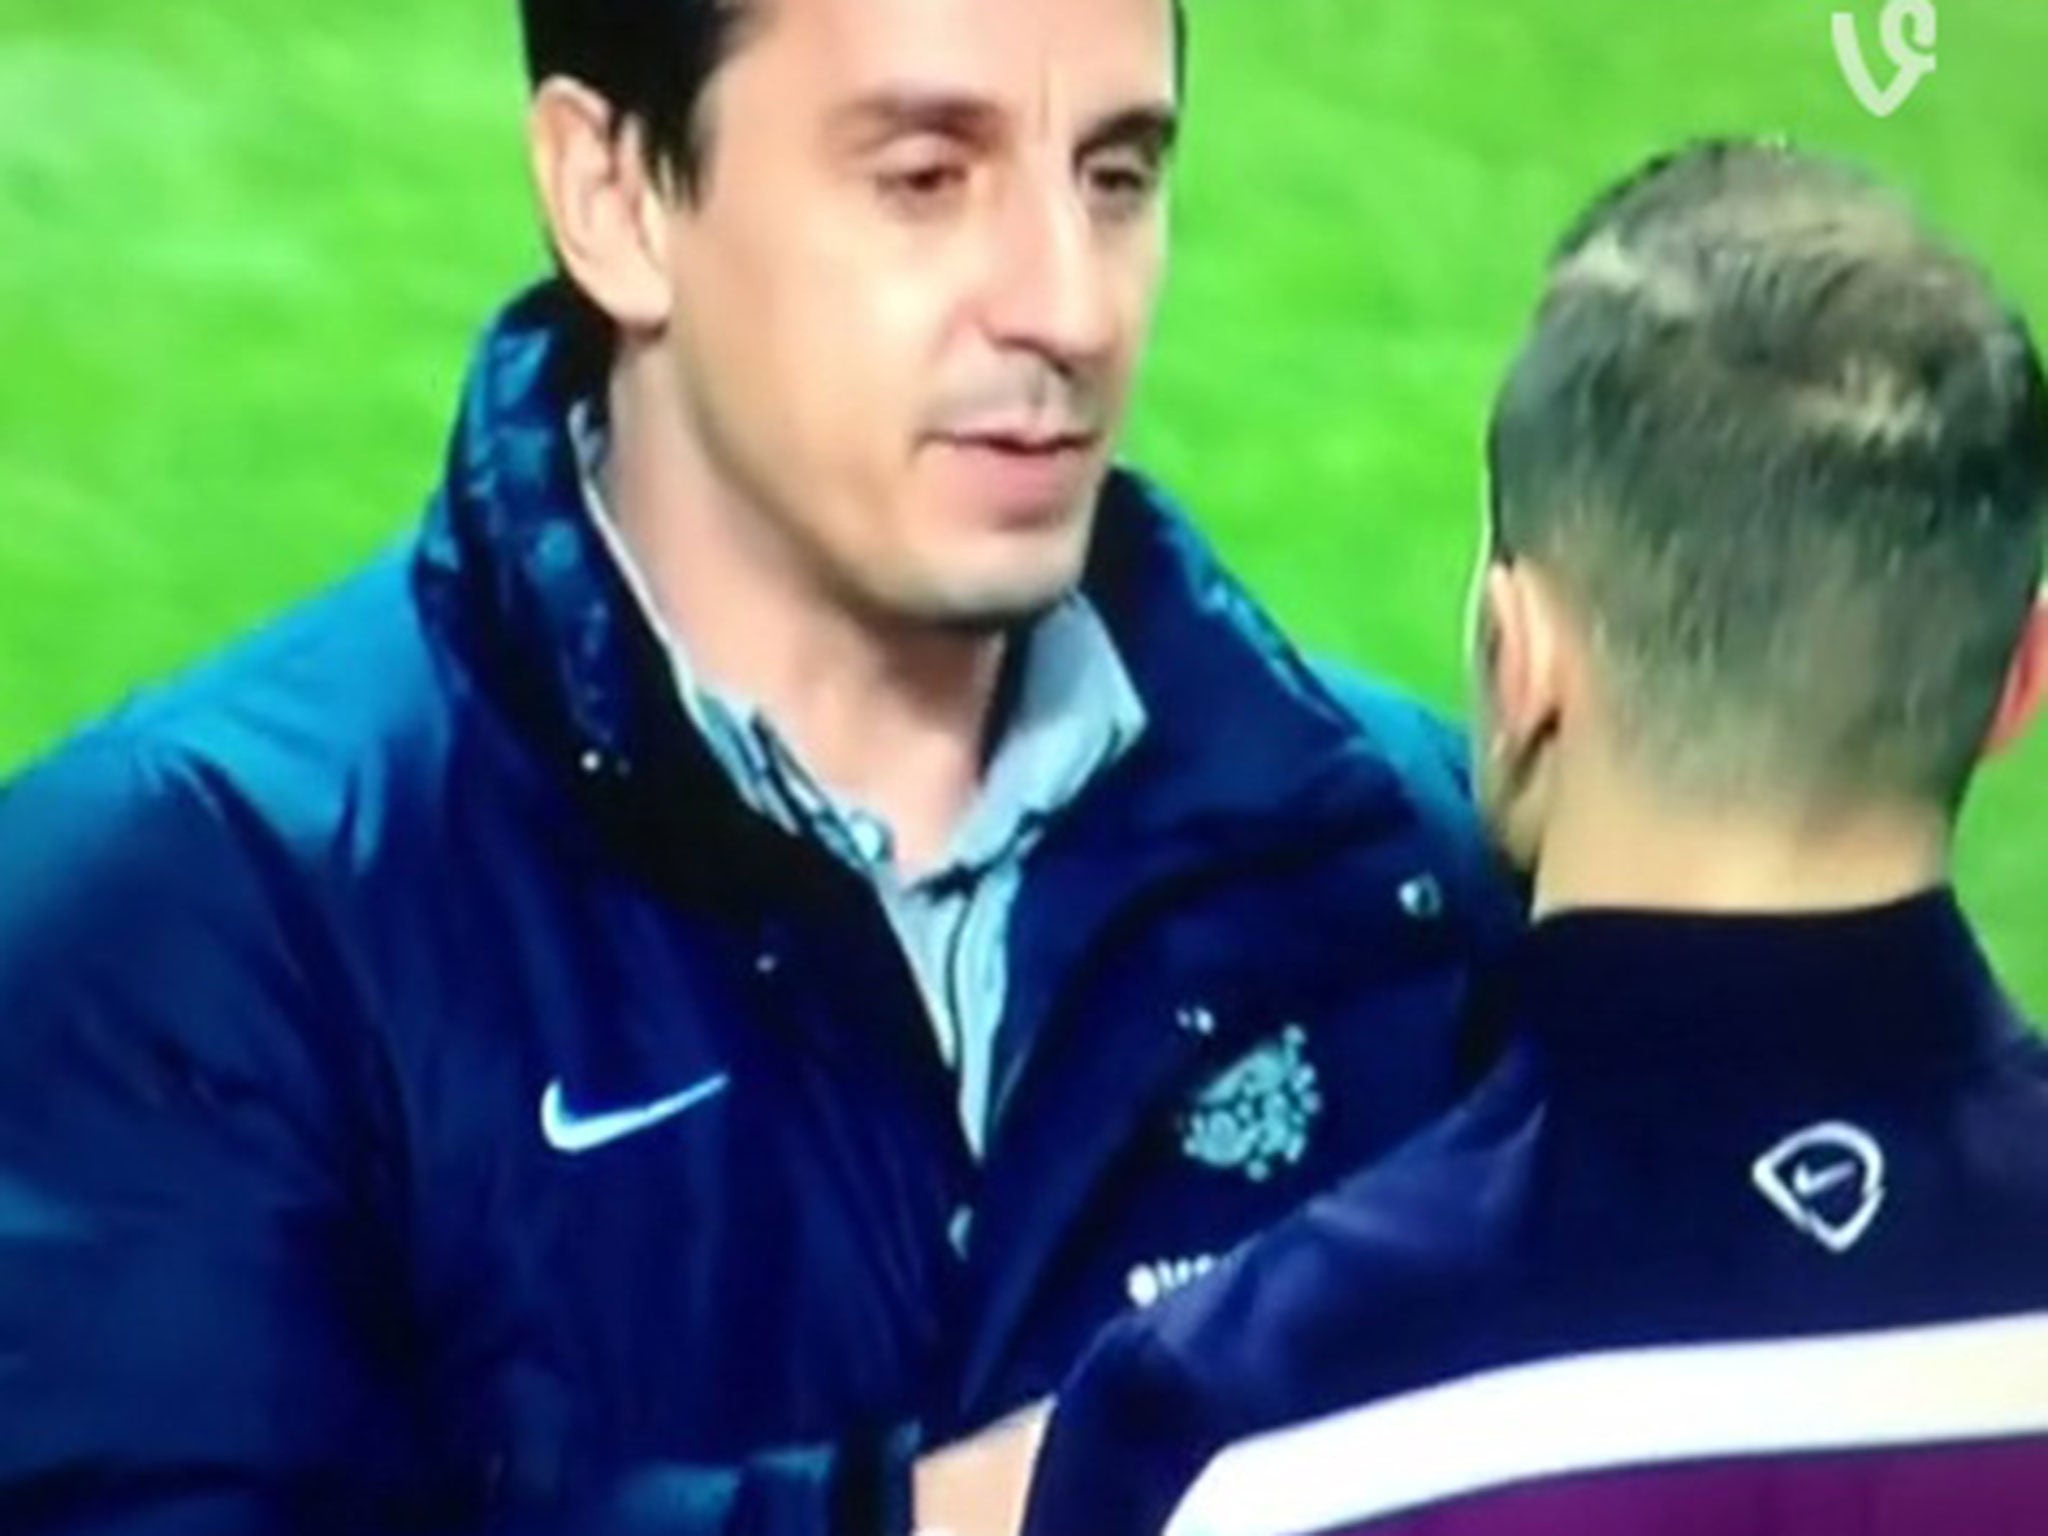 Gary Neville takes out Jack Wilshere's earphones before the Scotland-England match